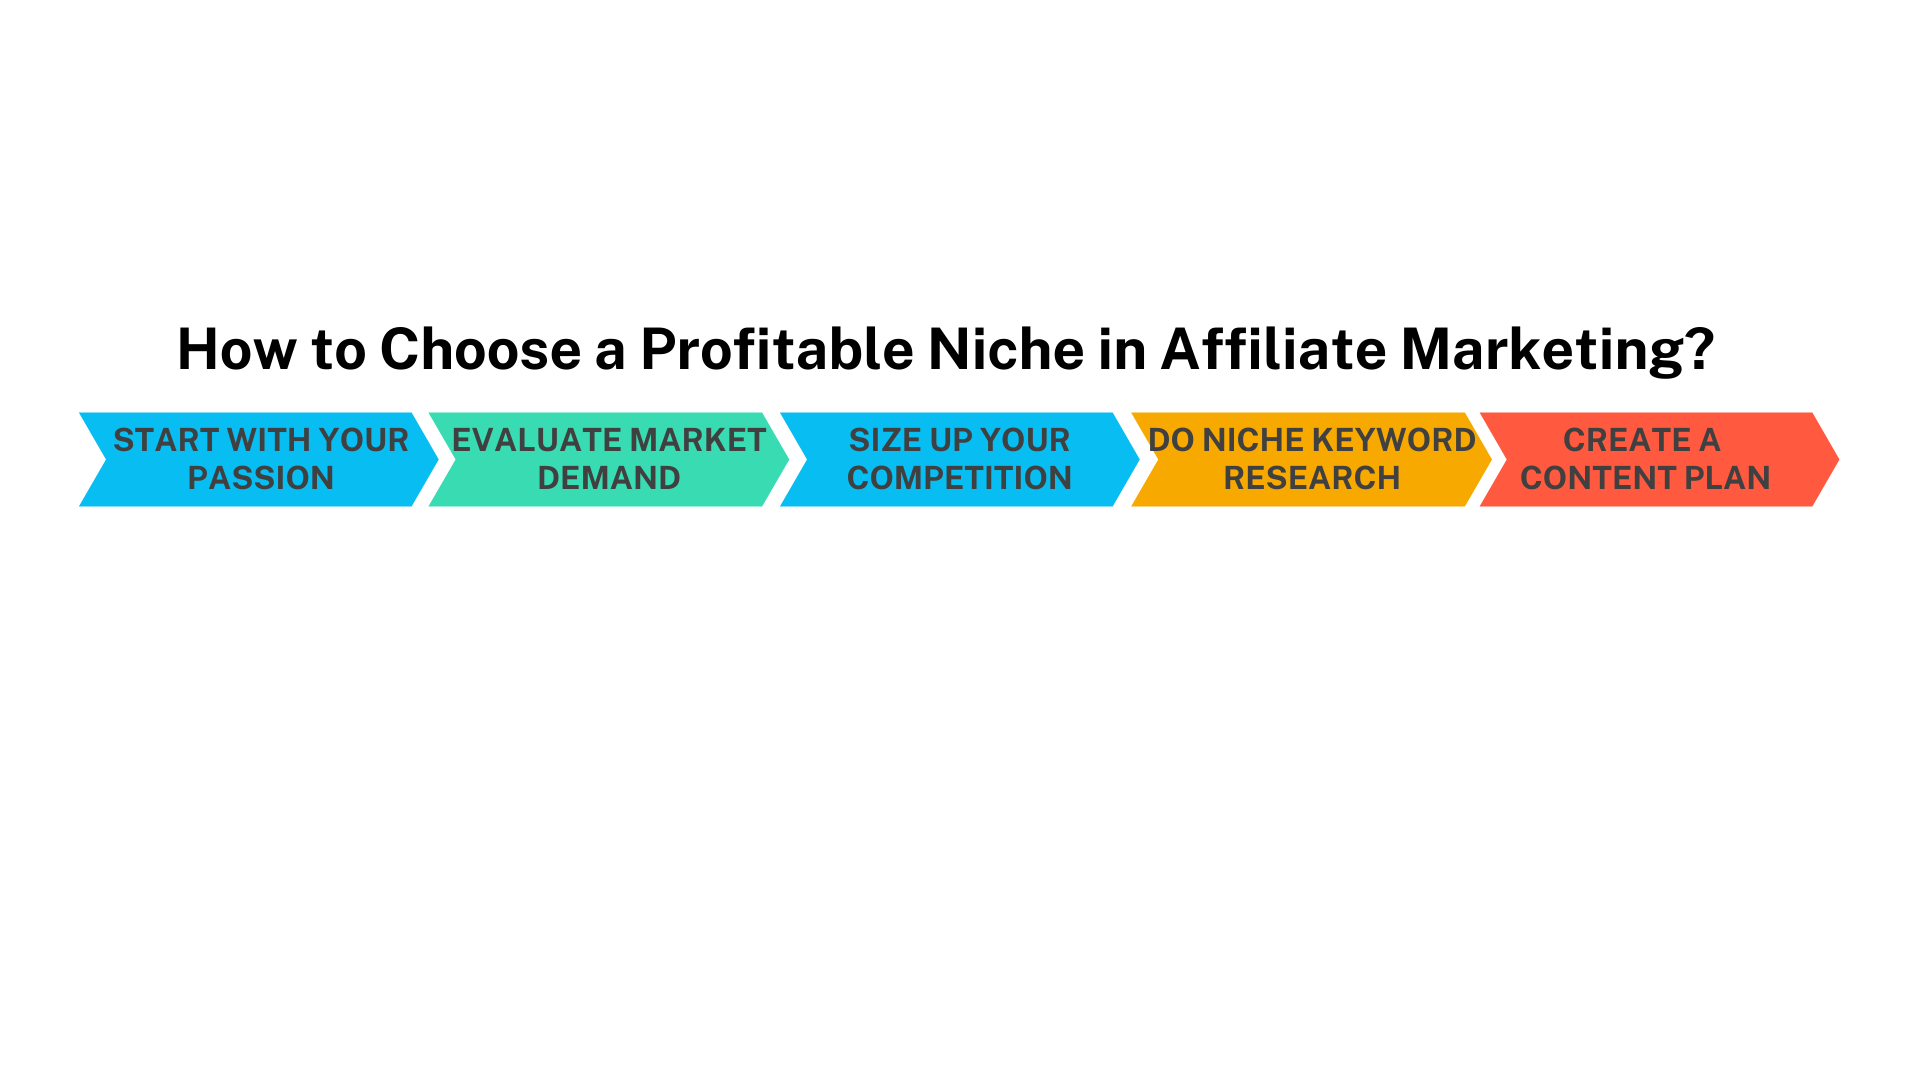 How to Choose a Profitable Niche in Affiliate Marketing